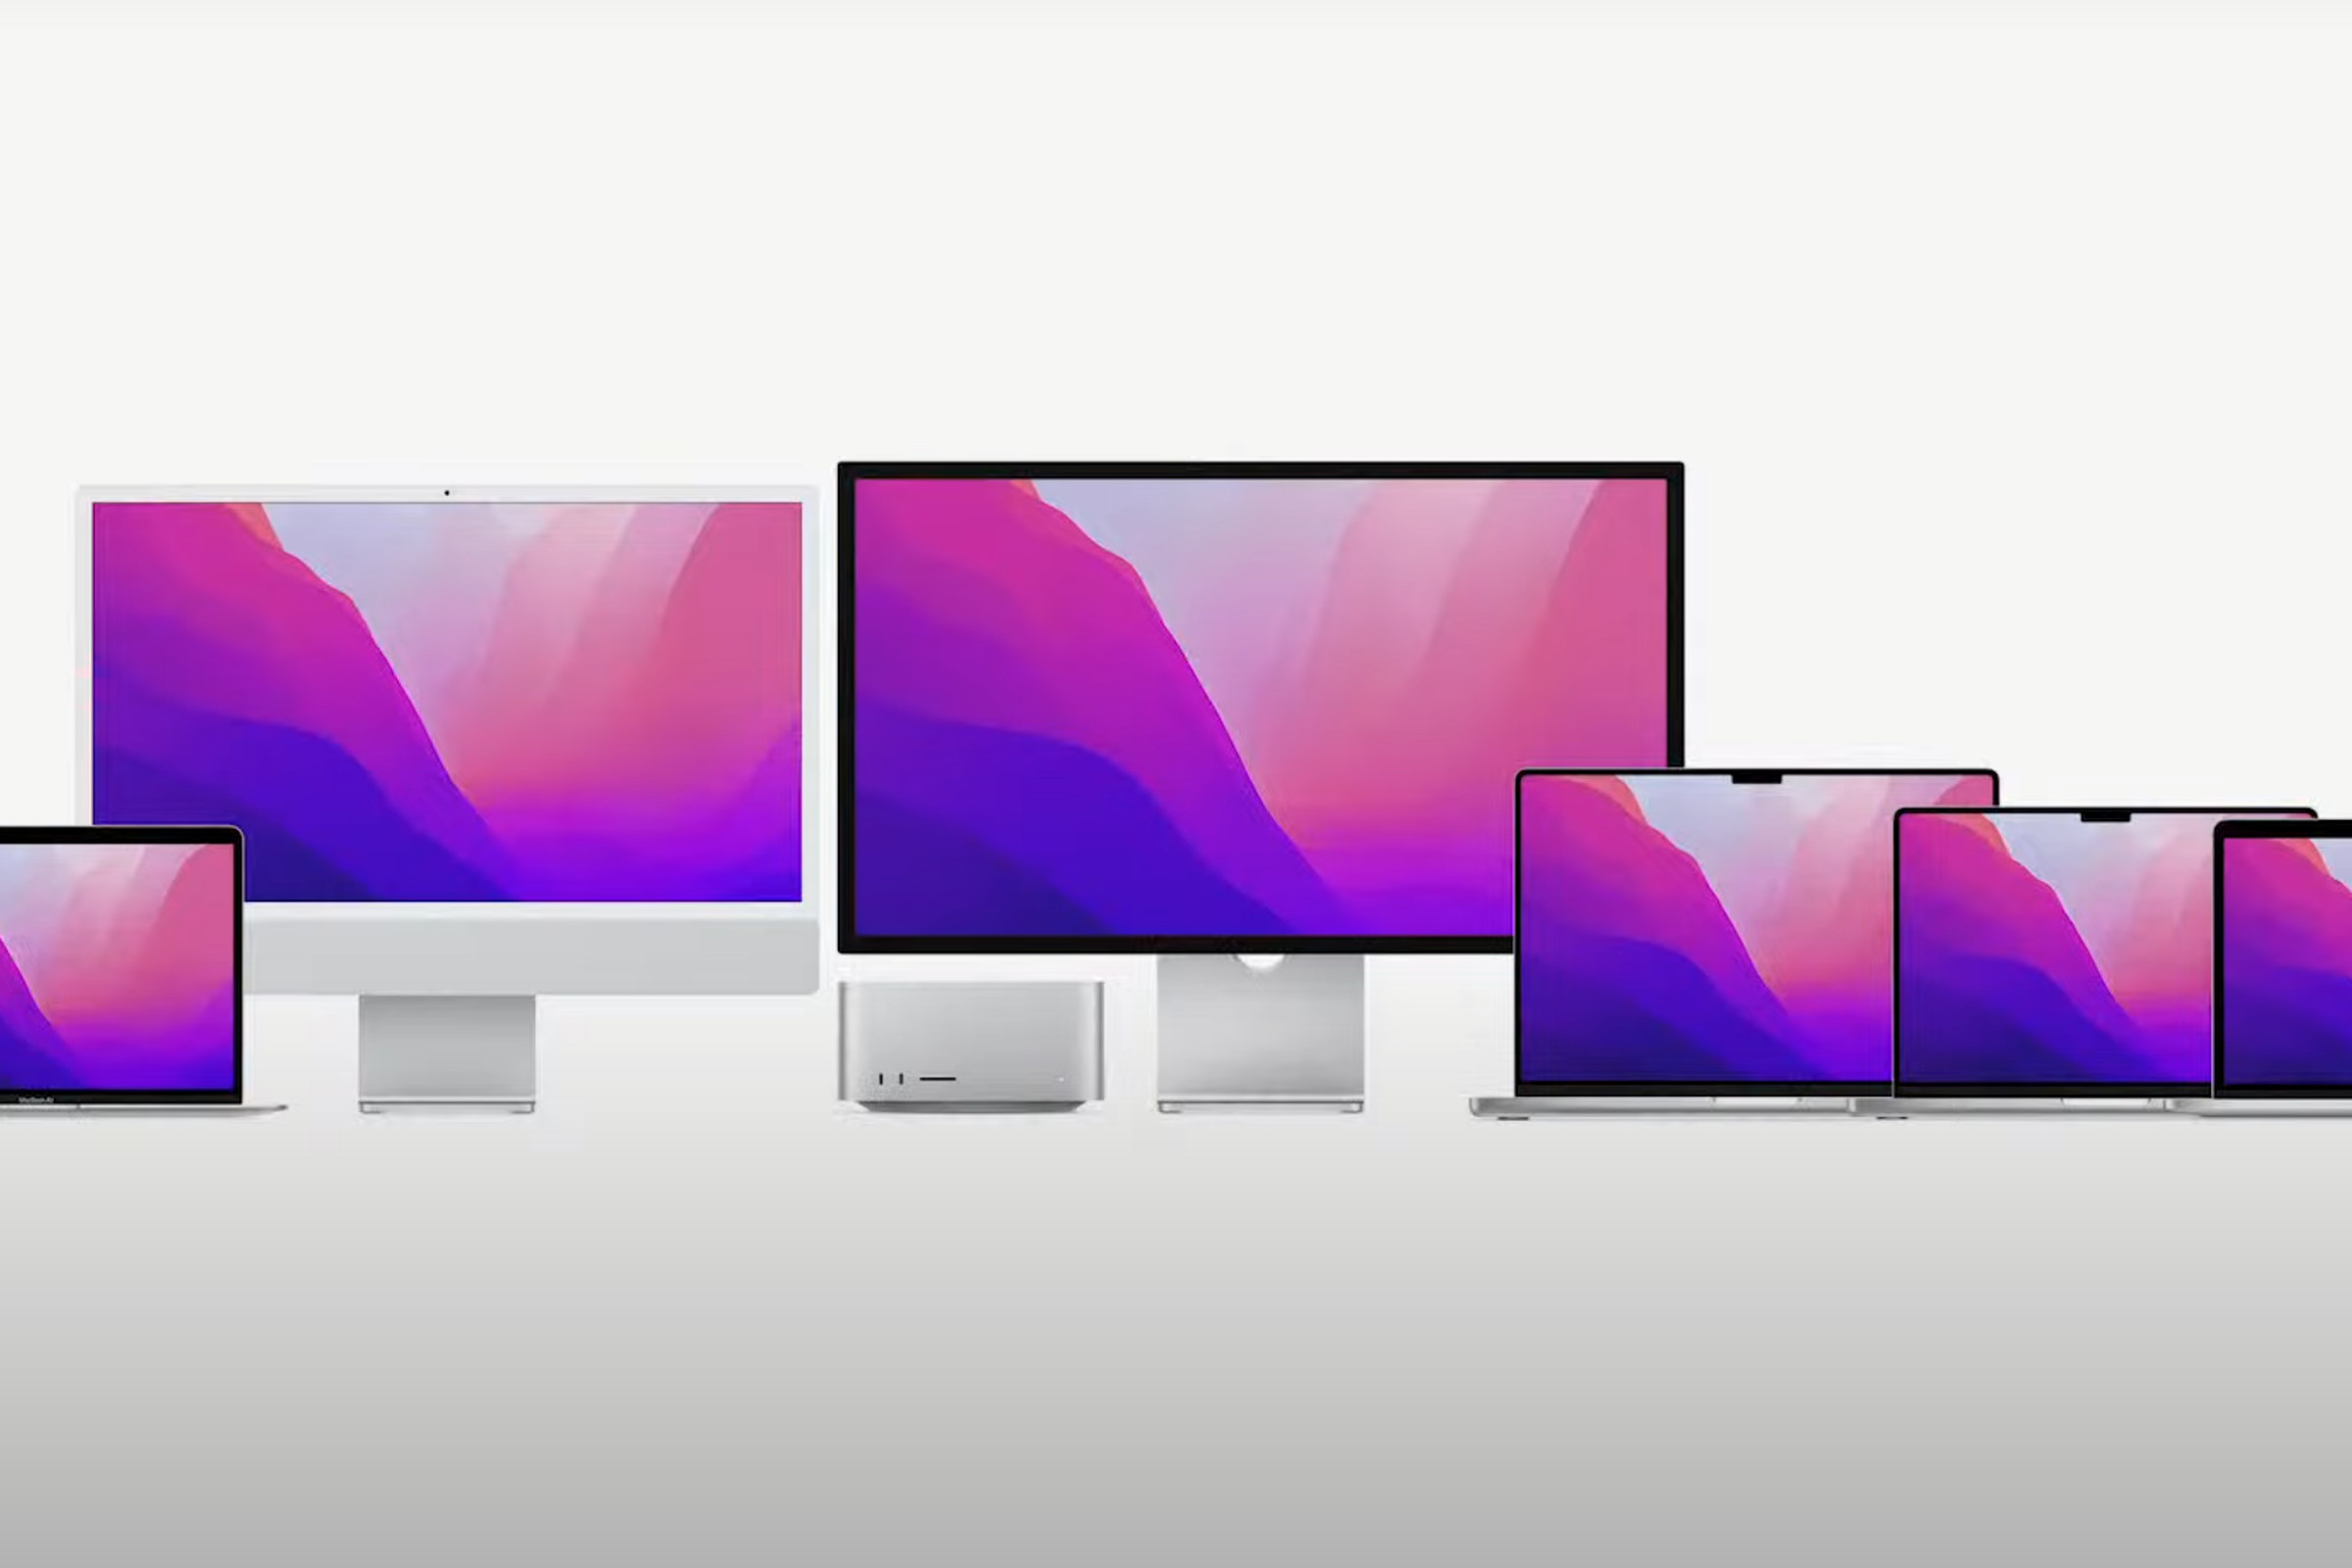 Find out how the new Mac Studio stacks up